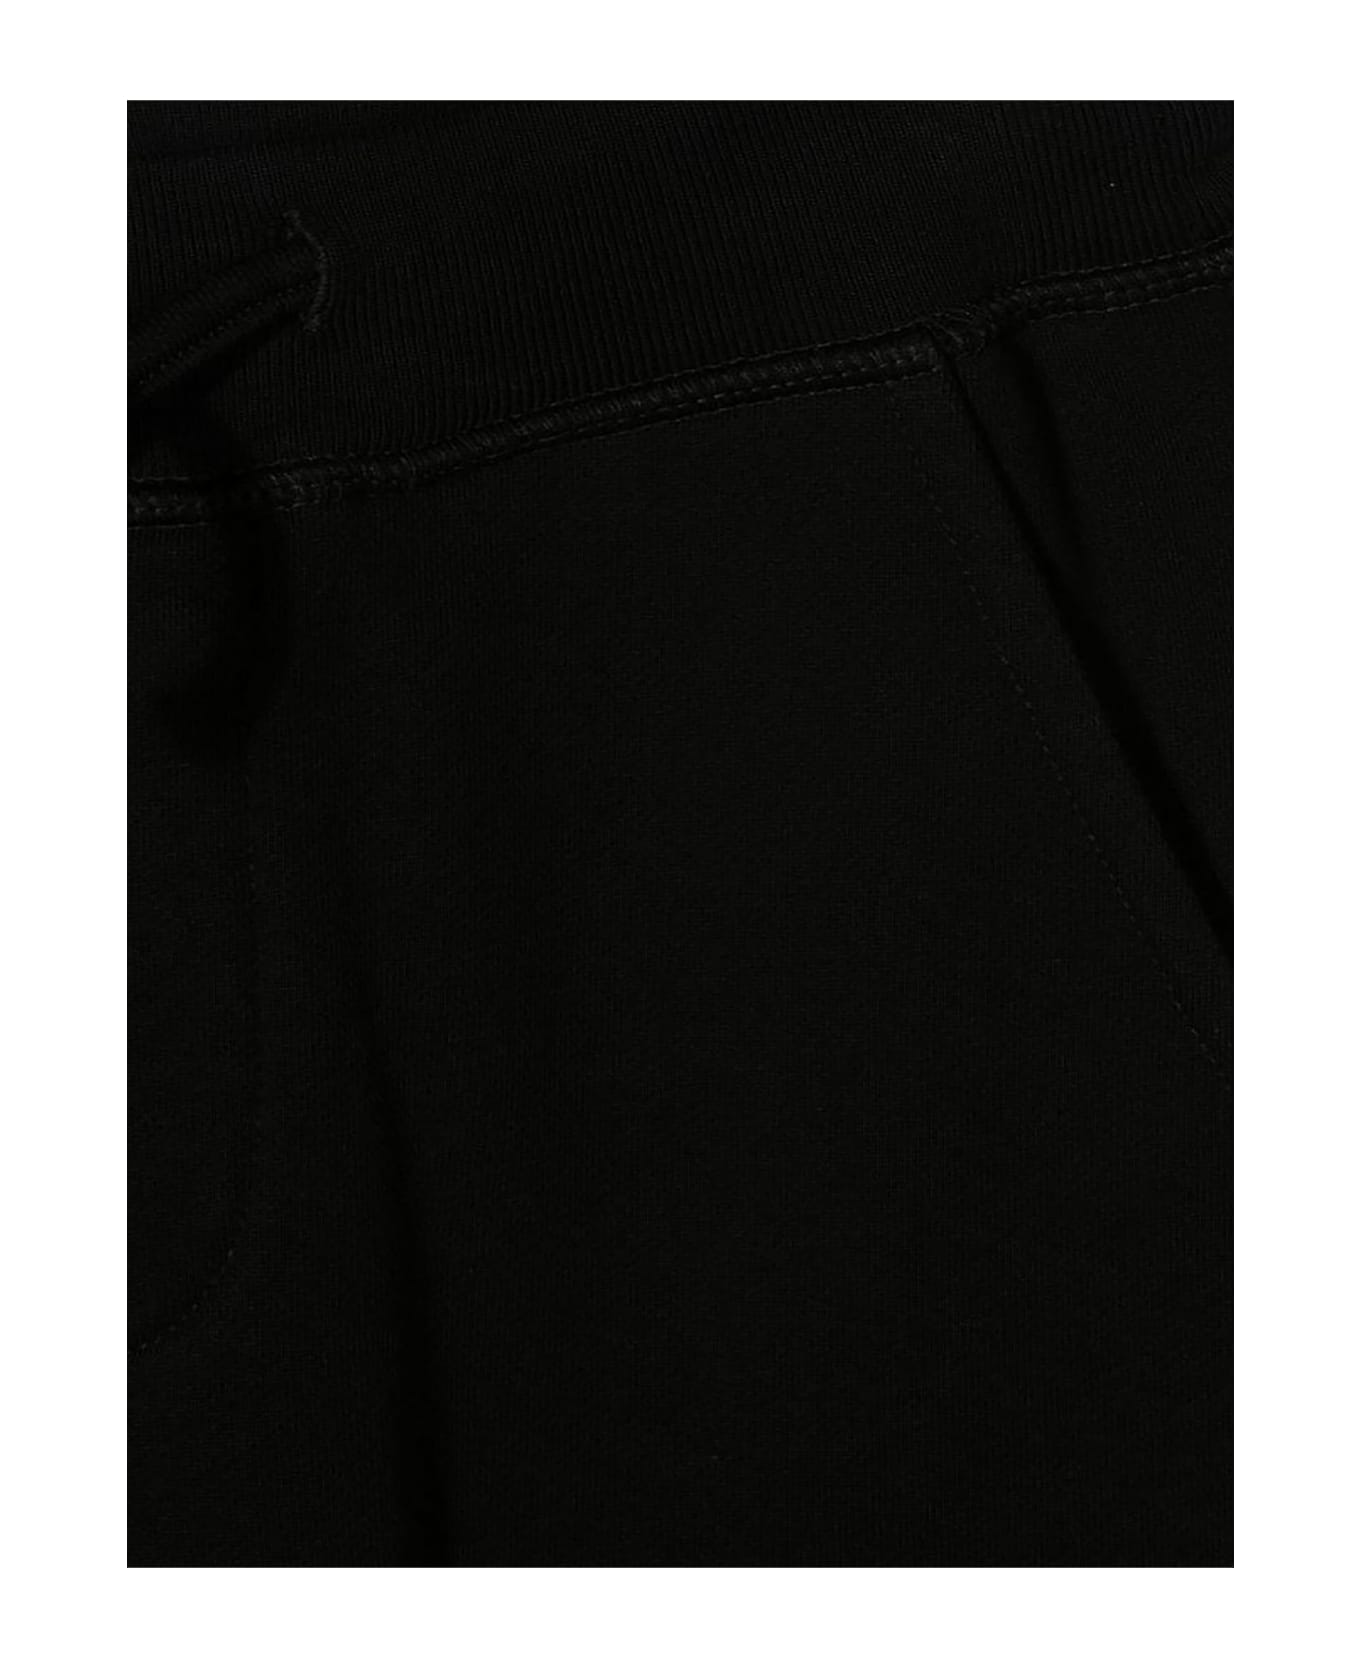 Dsquared2 Trousers Black - Black ボトムス